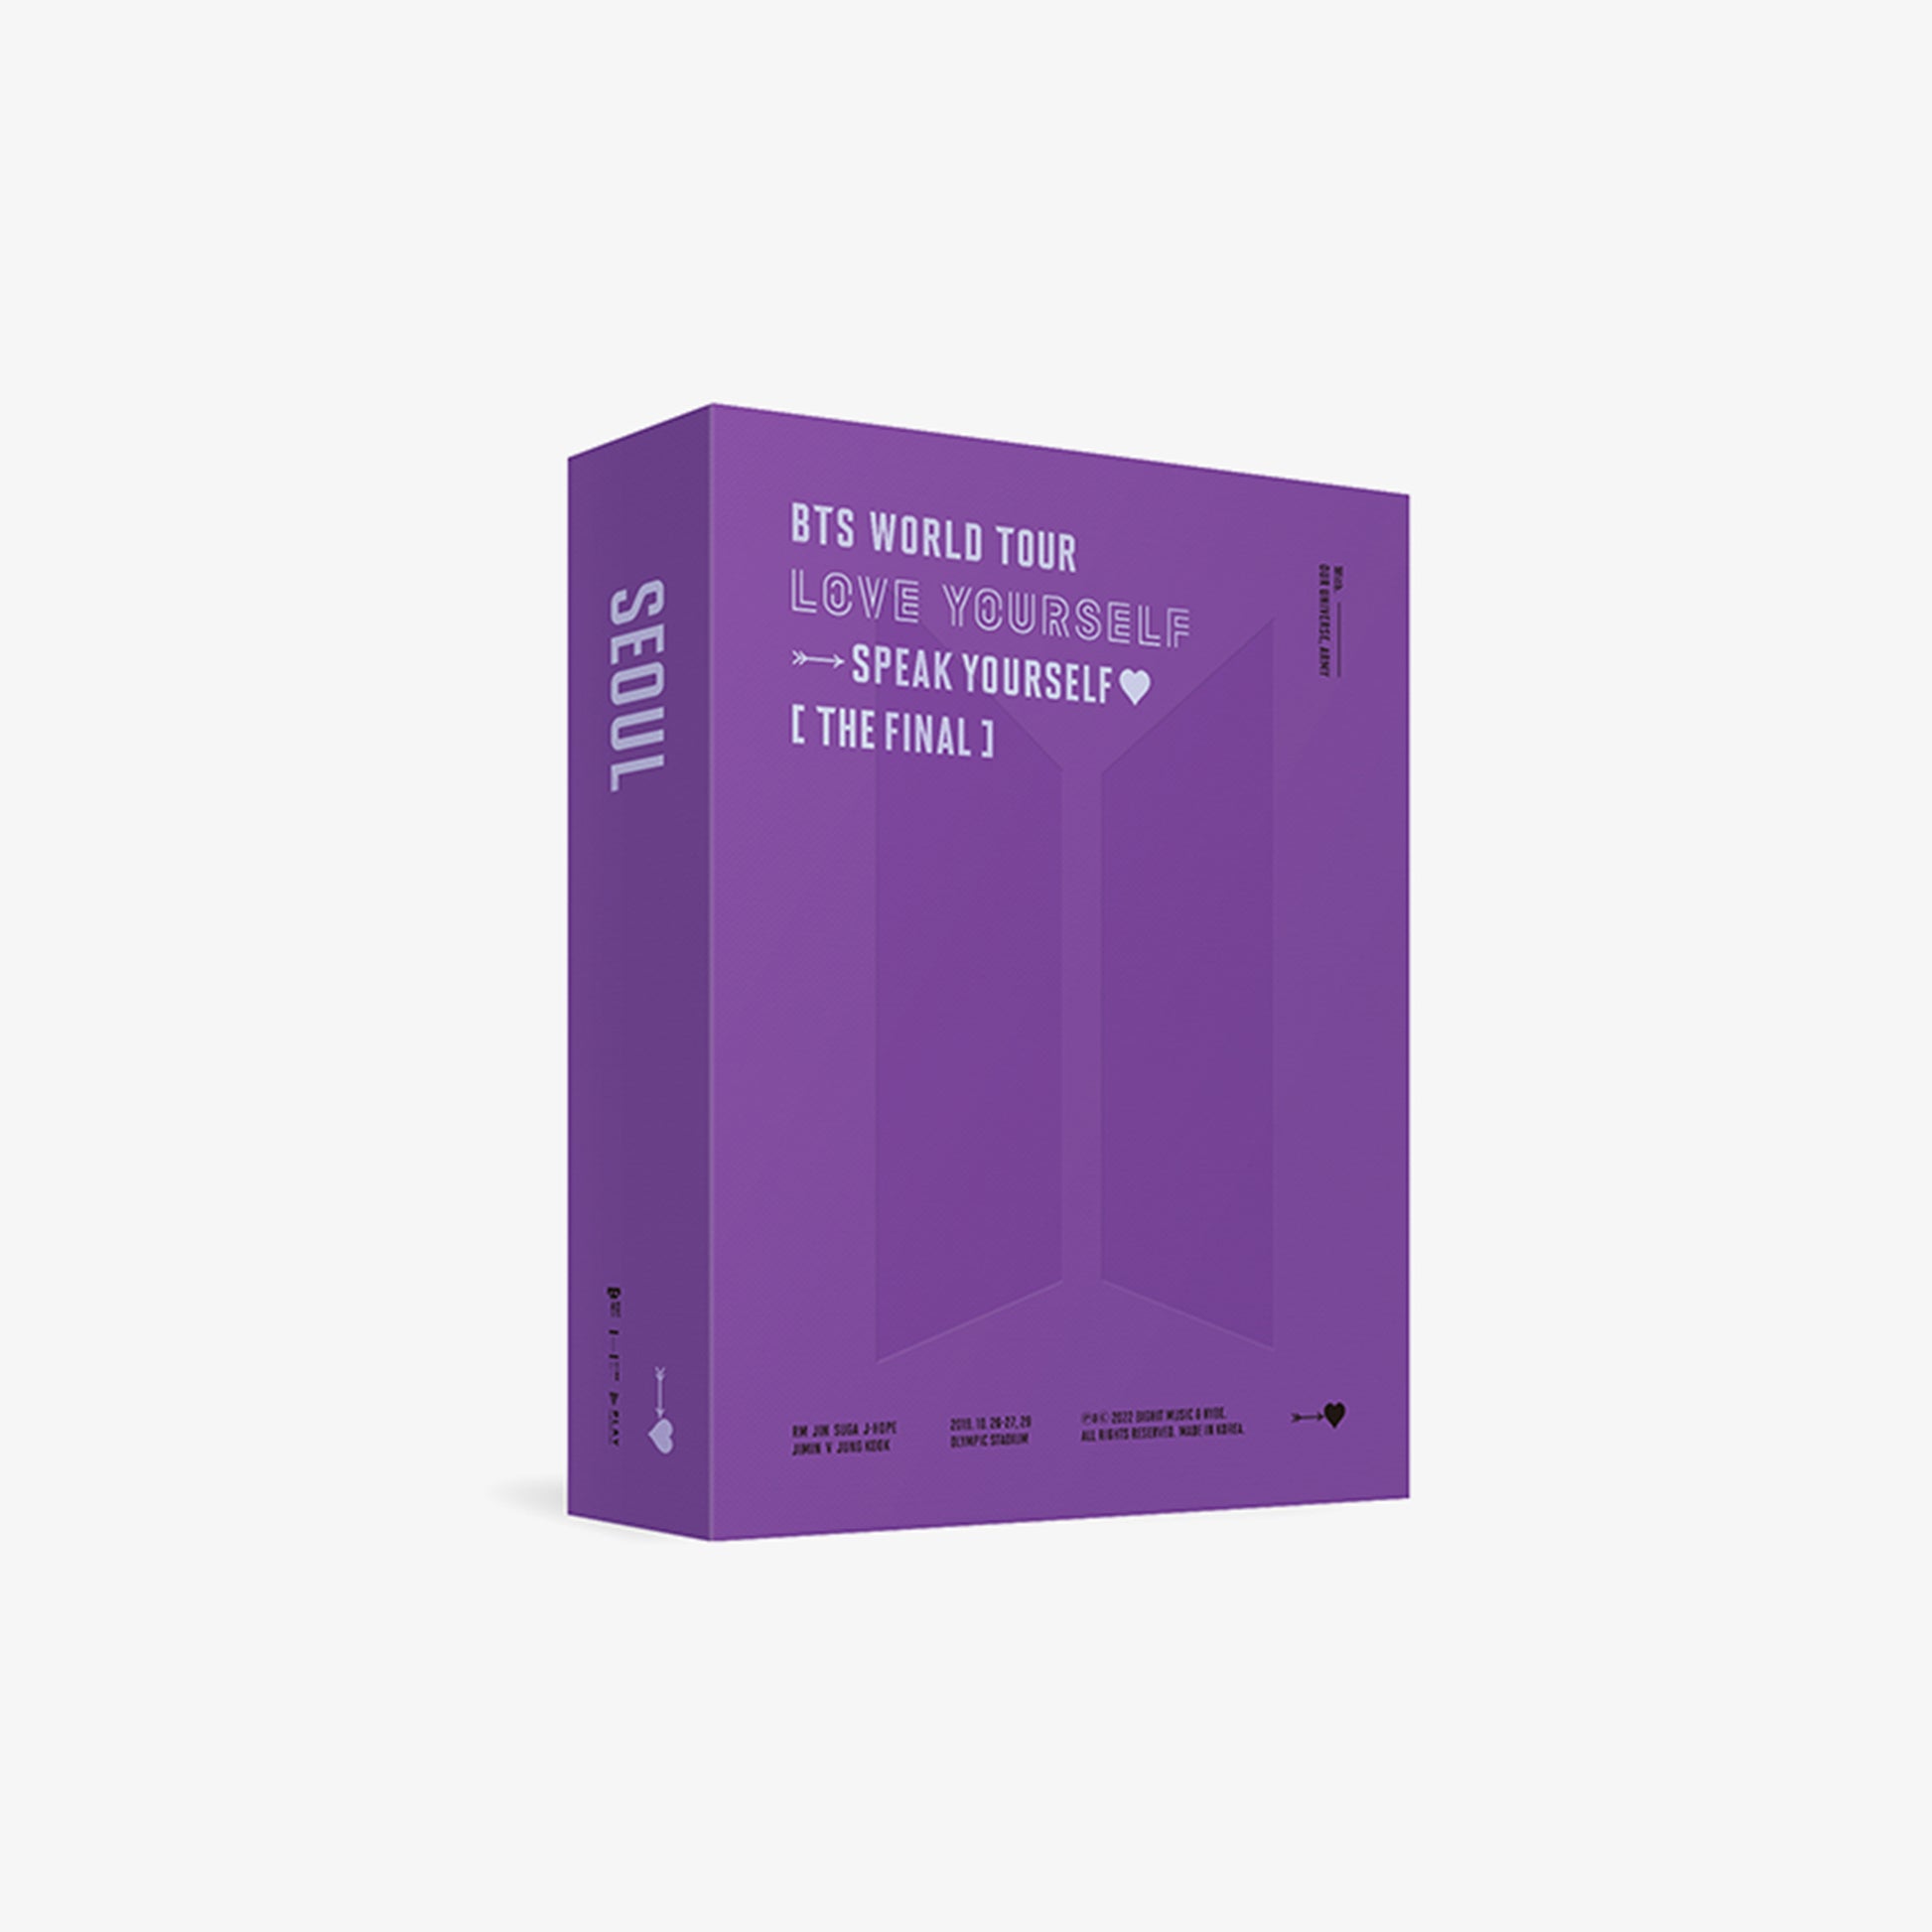 BTS WORLD TOUR LOVE YOURSELF 'SPEAK YOURSELF♥' [THE FINAL] (DIGITAL CODE) COVER